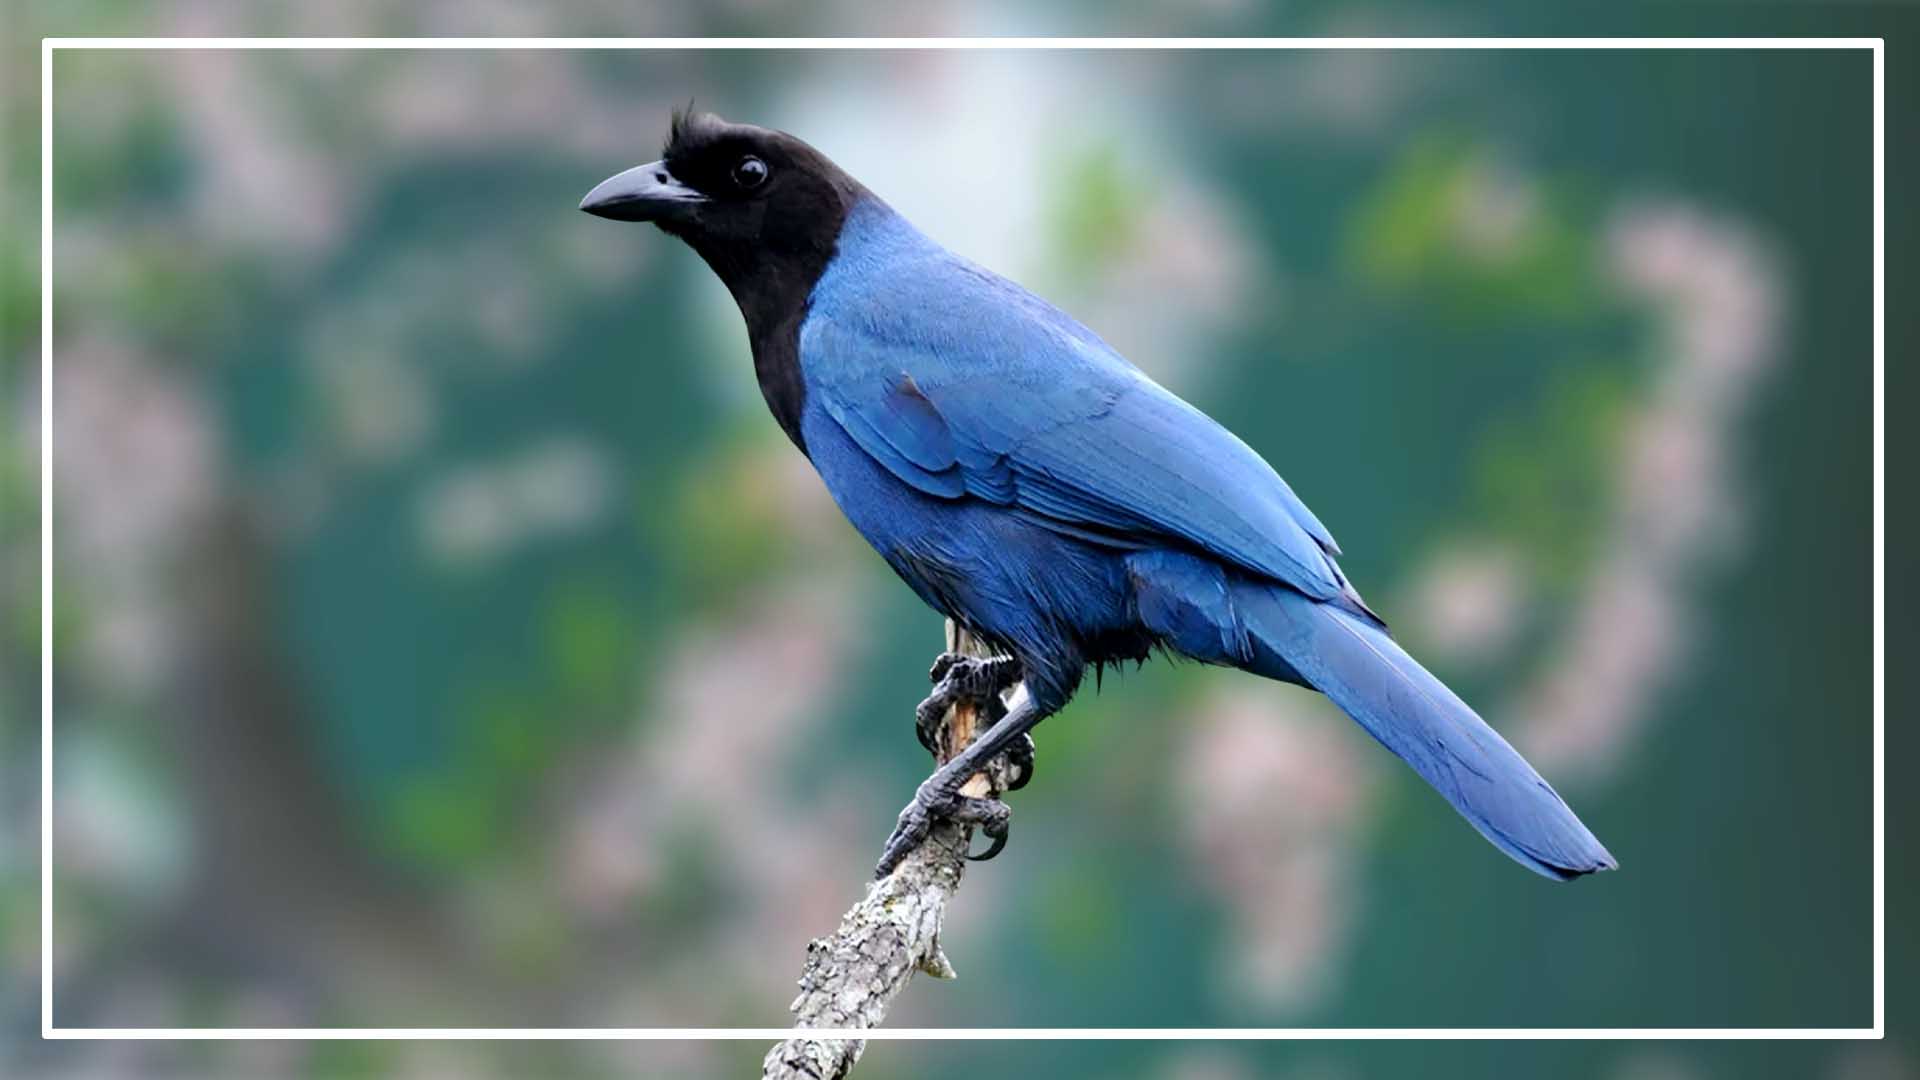 Azure Jay is a Blue Bird with Black Head
